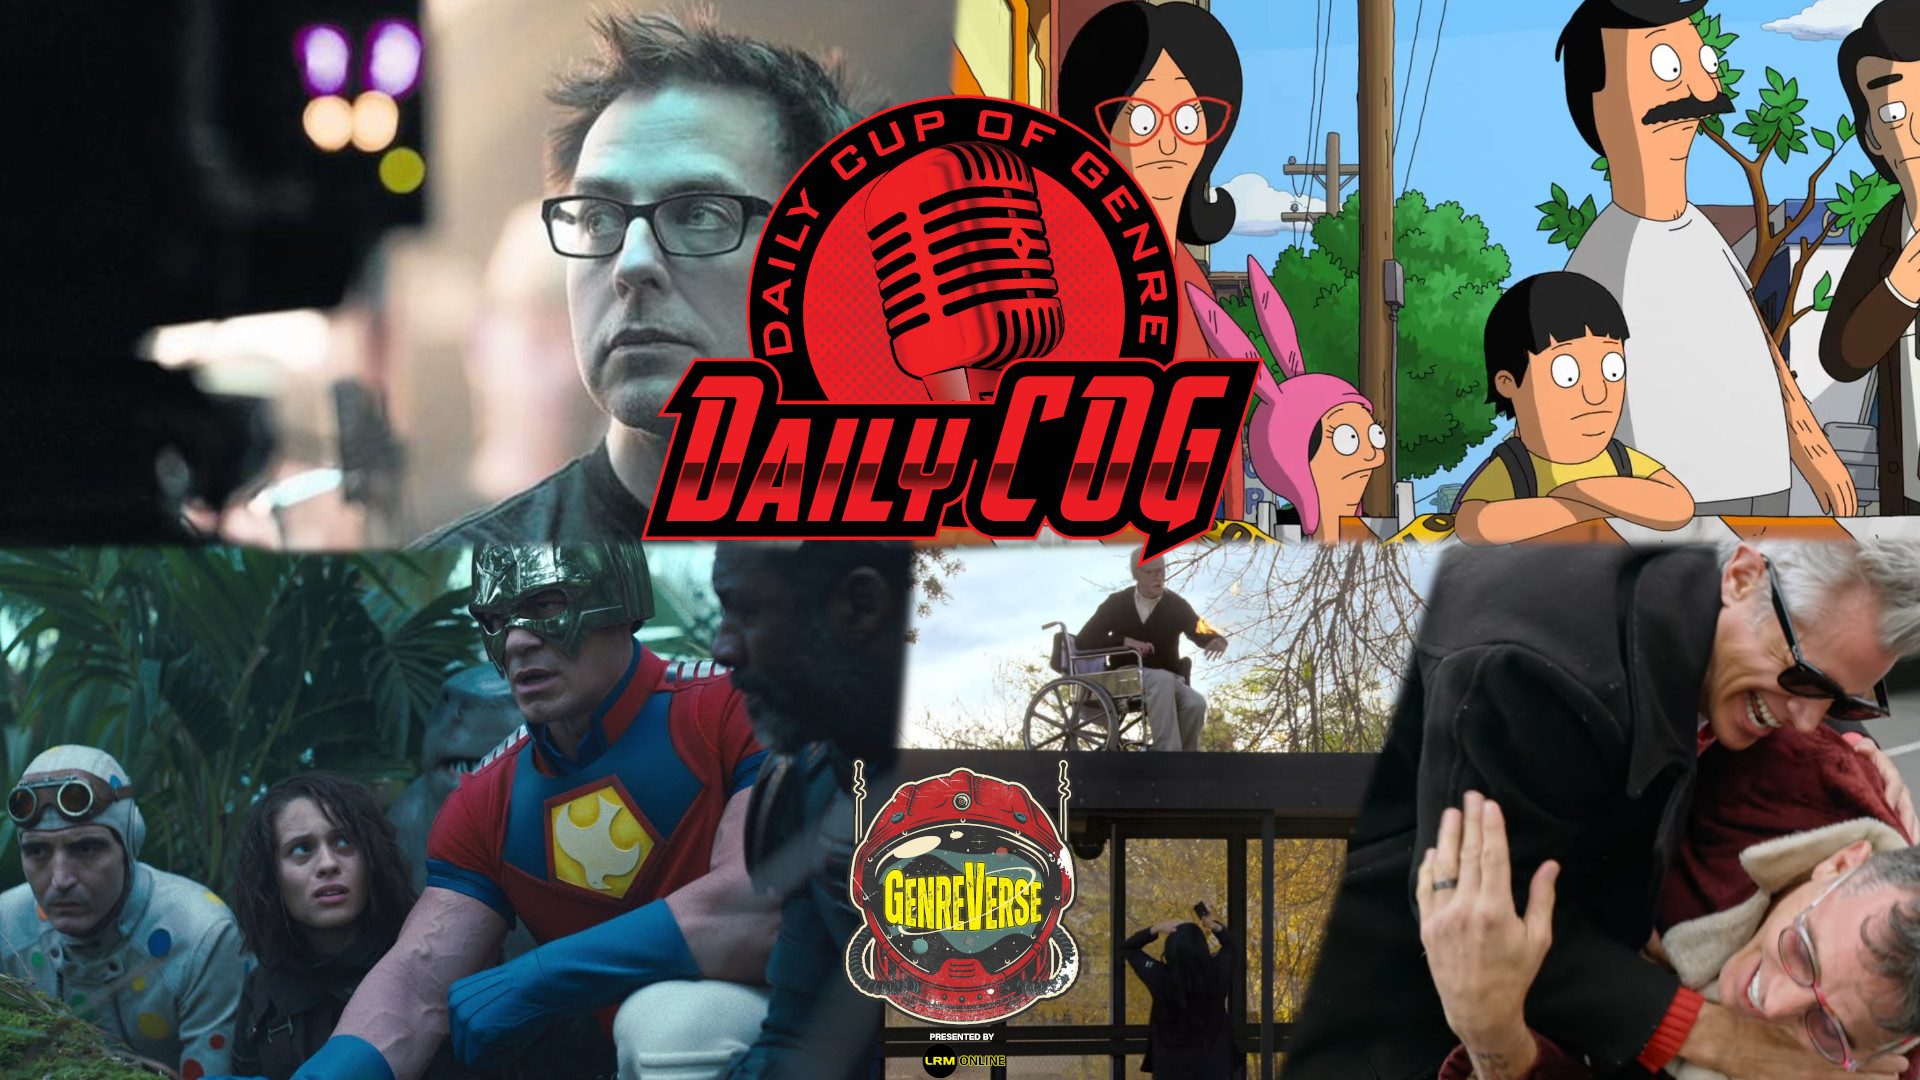 Bob’s Burgers The Movie & Jackass Forever Trailer Reaction, James Gunn’s Next DC Project Confirmed For TV | Daily COG